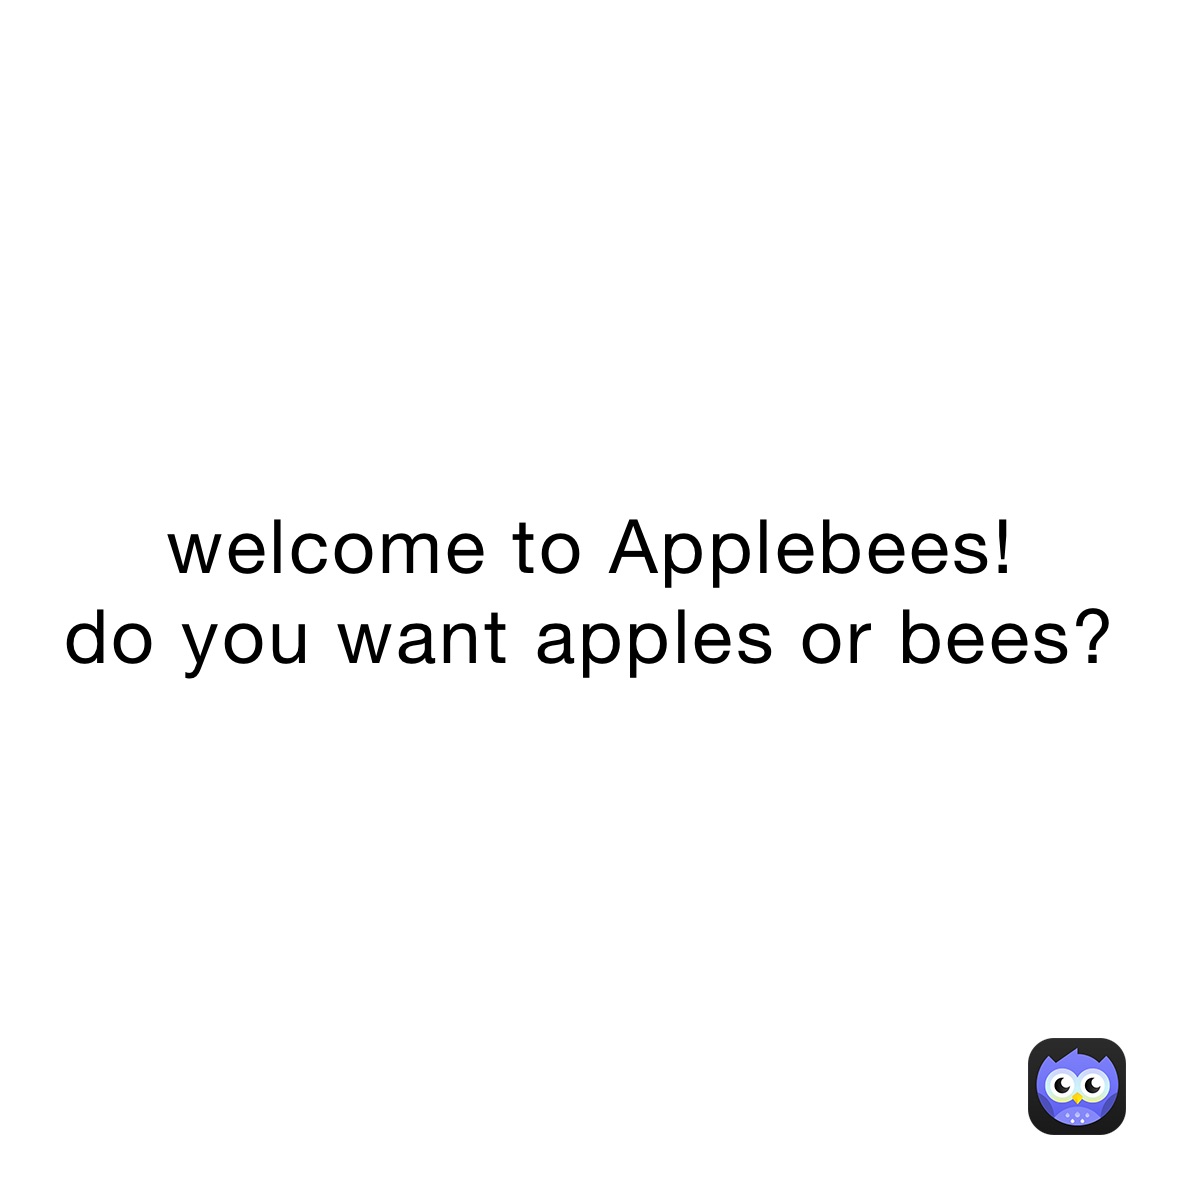 welcome to Applebees!
do you want apples or bees?